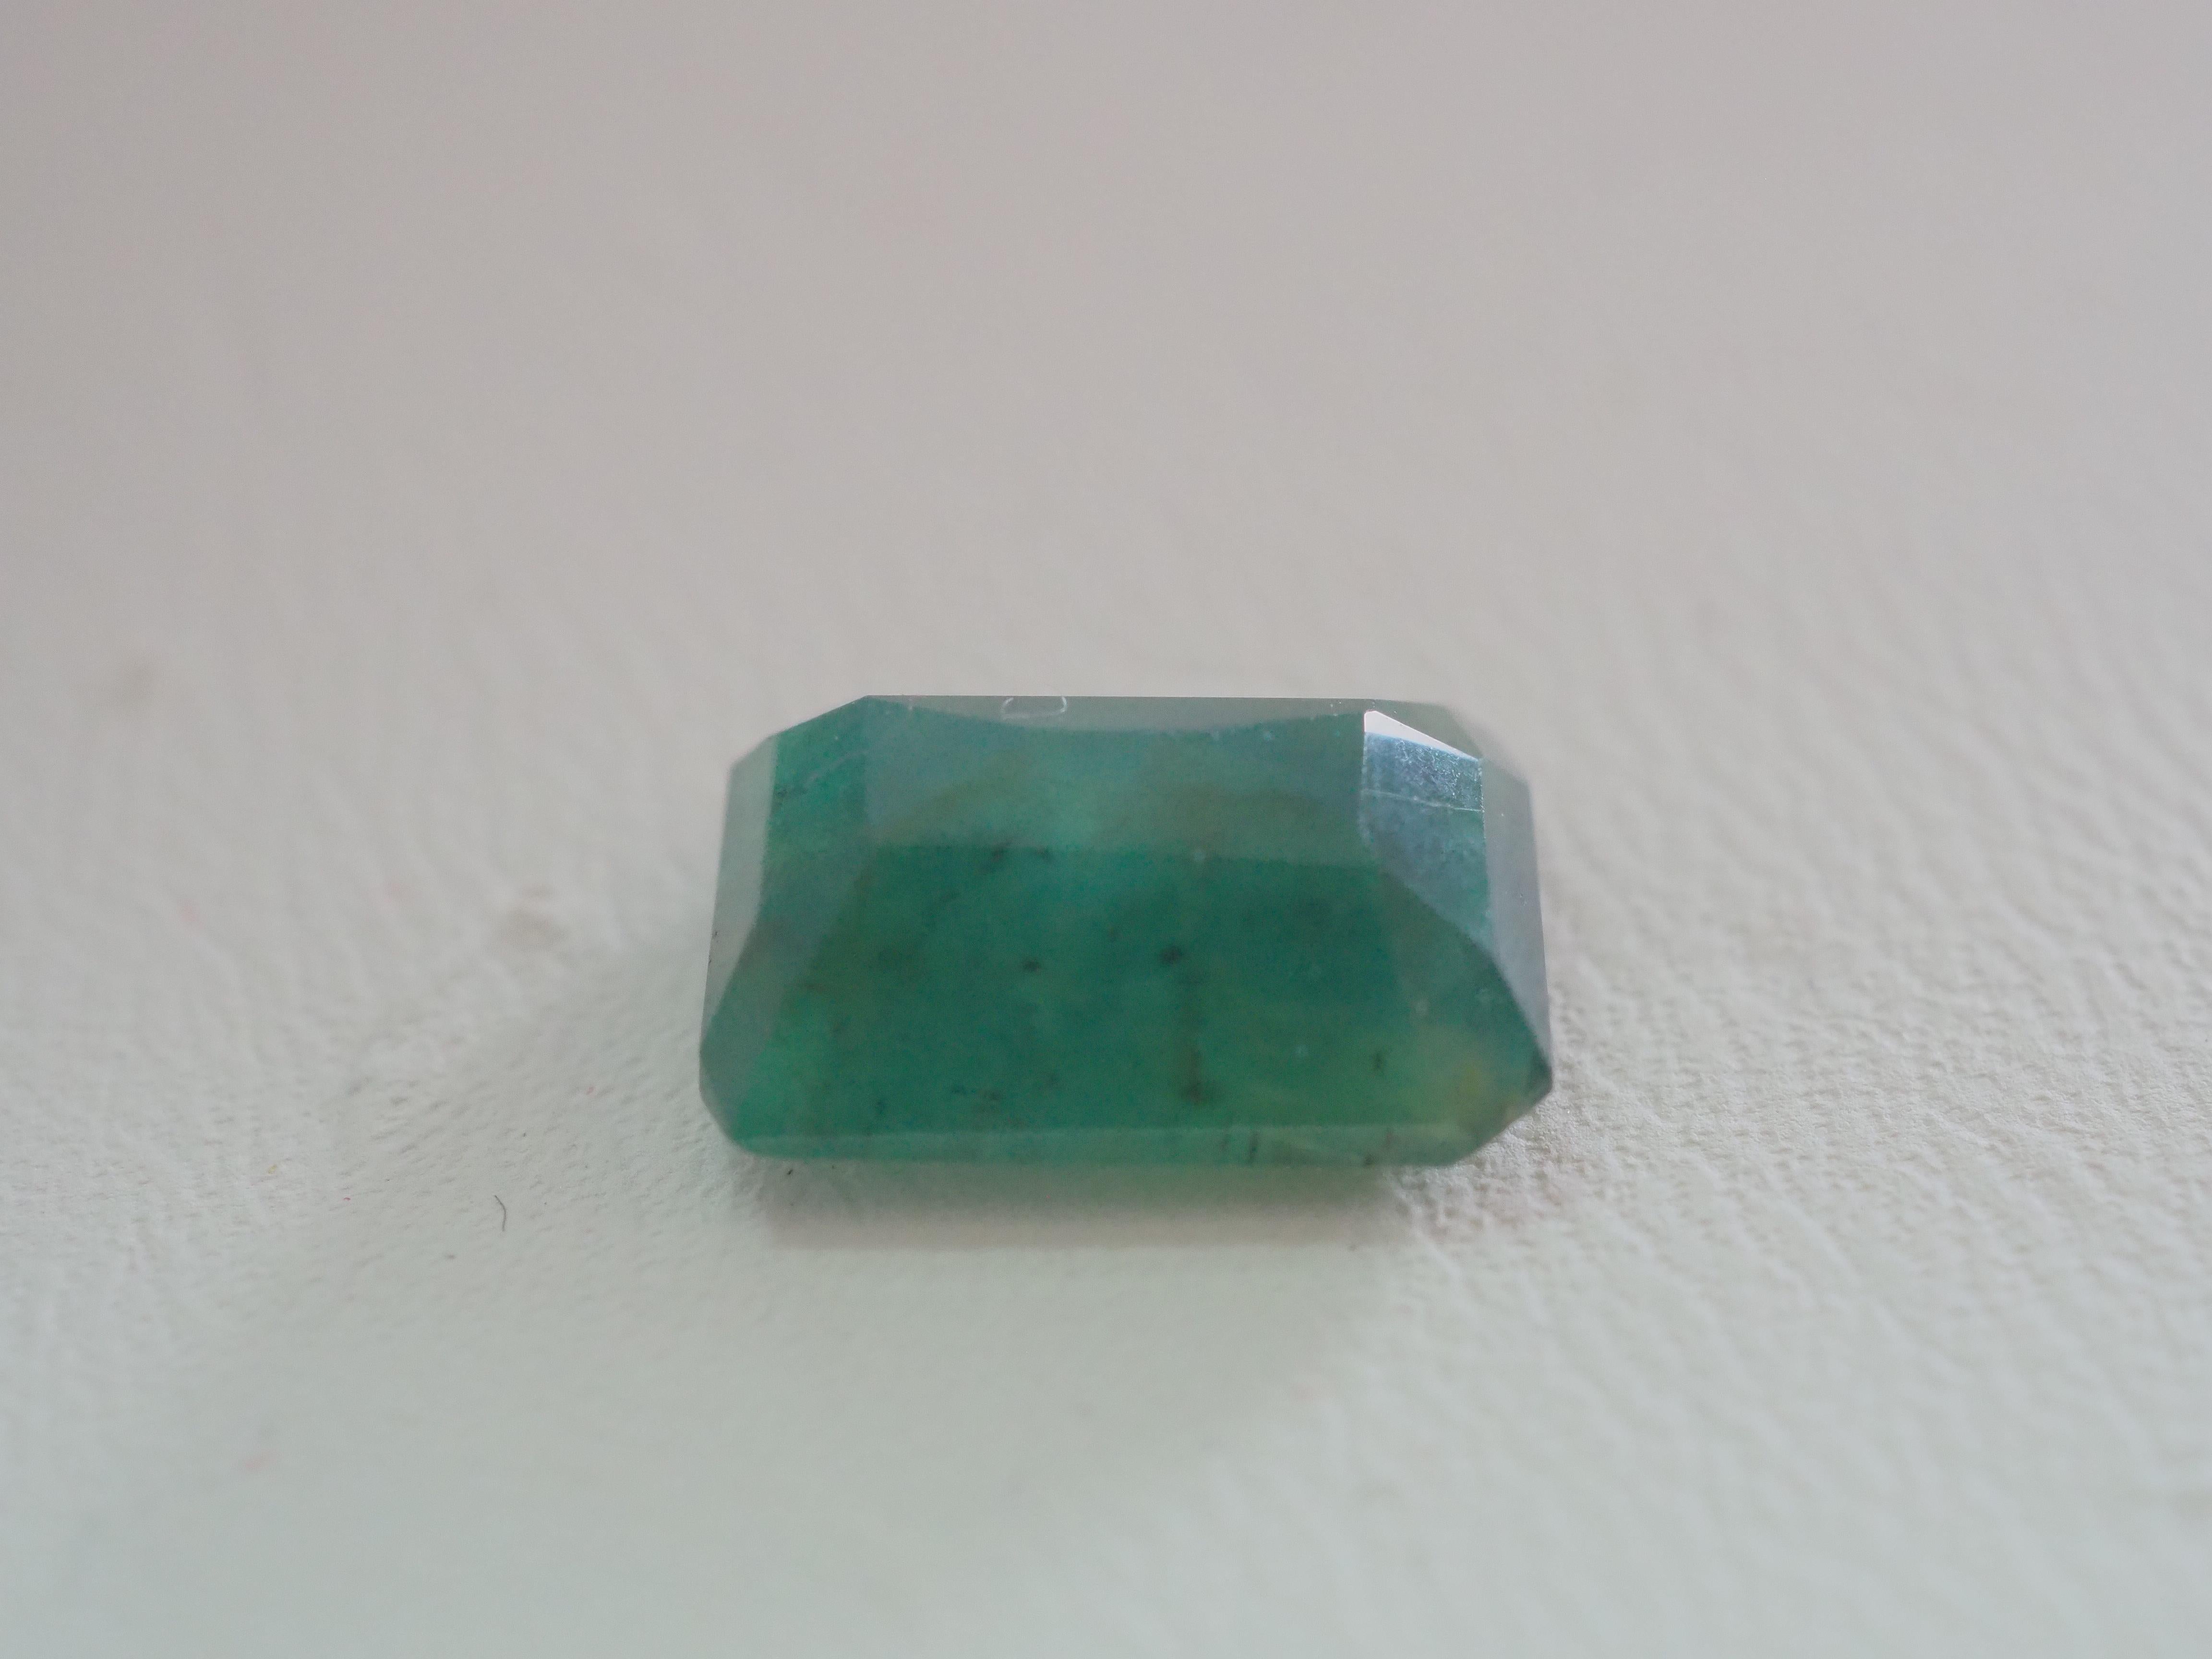 2.90ct Emerald Cut Natural Zambian Green Emerald Gemstone, a gemstone with good mixed emerald cut and nice color with perfect size for a ring for all genders. It lacks the typical luster with all the heavy inclusions presented but made up with its